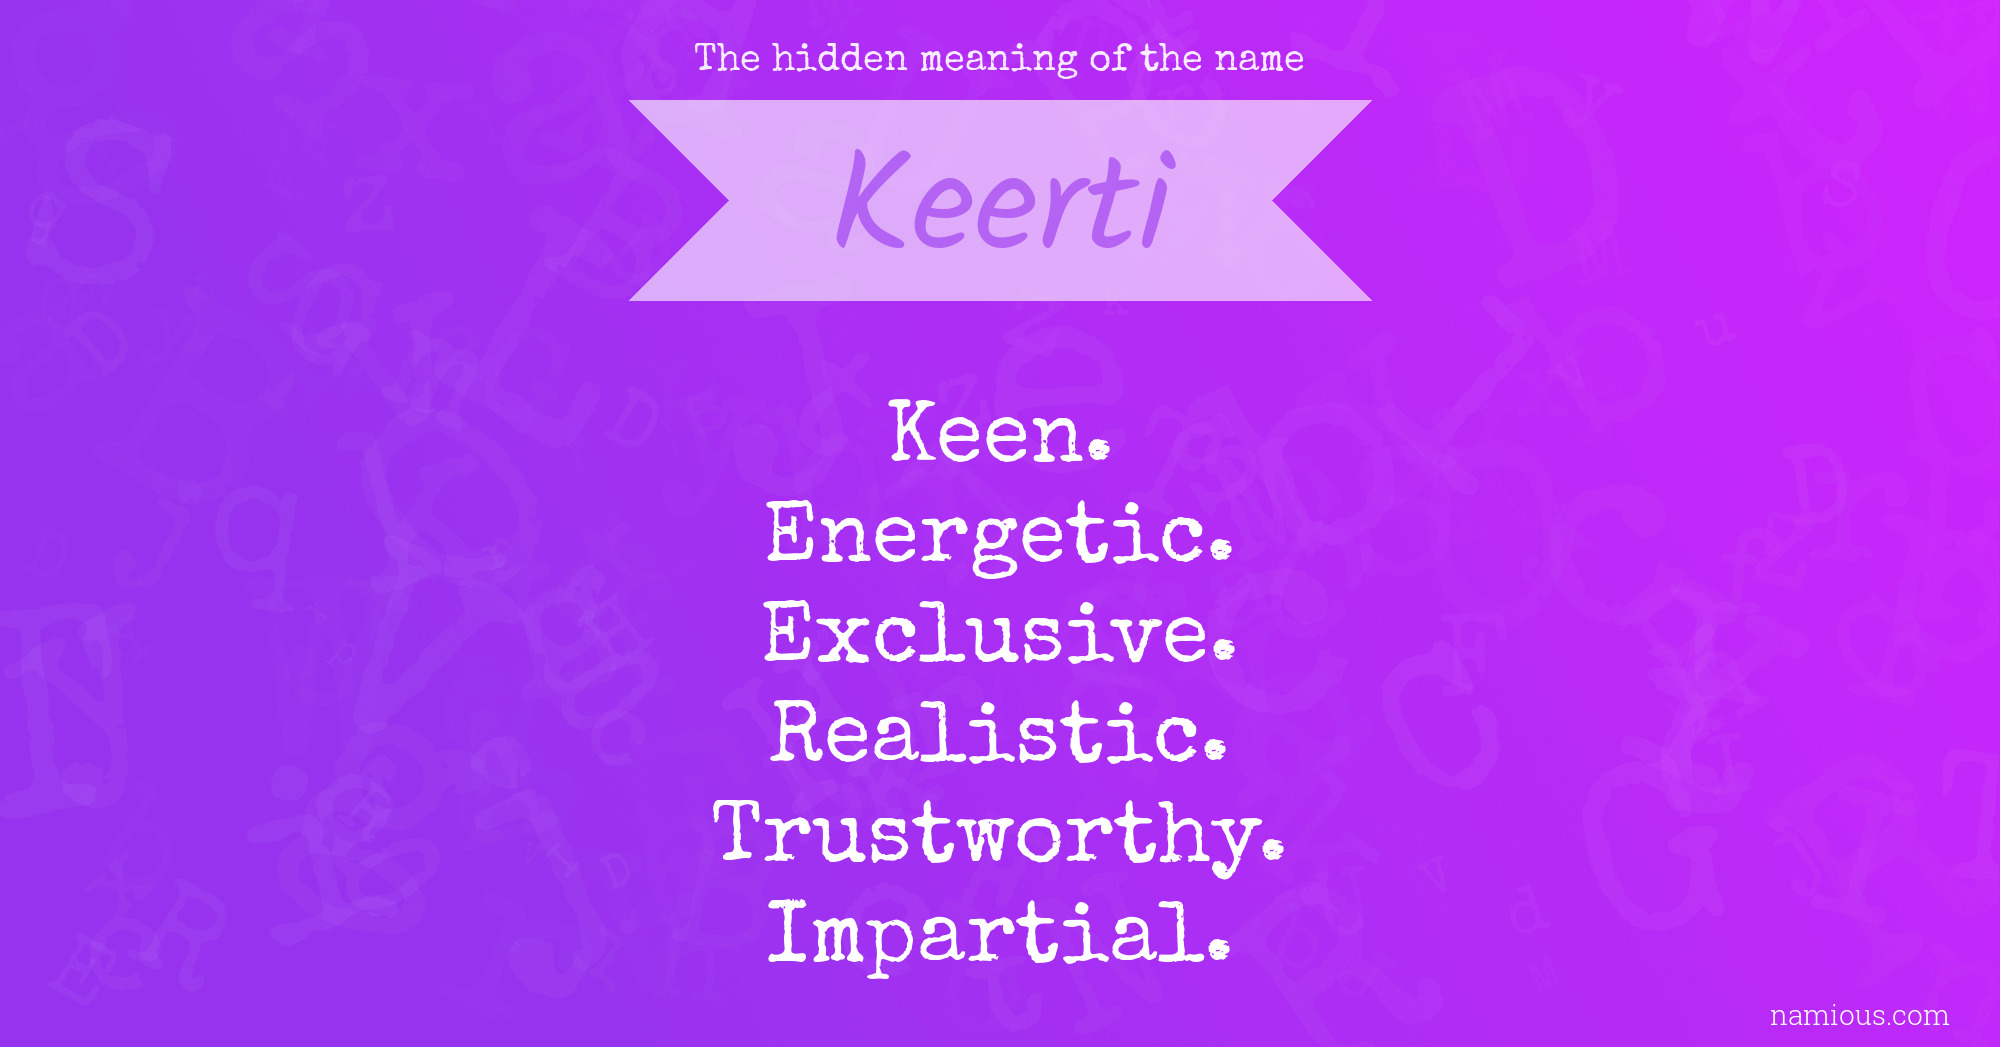 The hidden meaning of the name Keerti